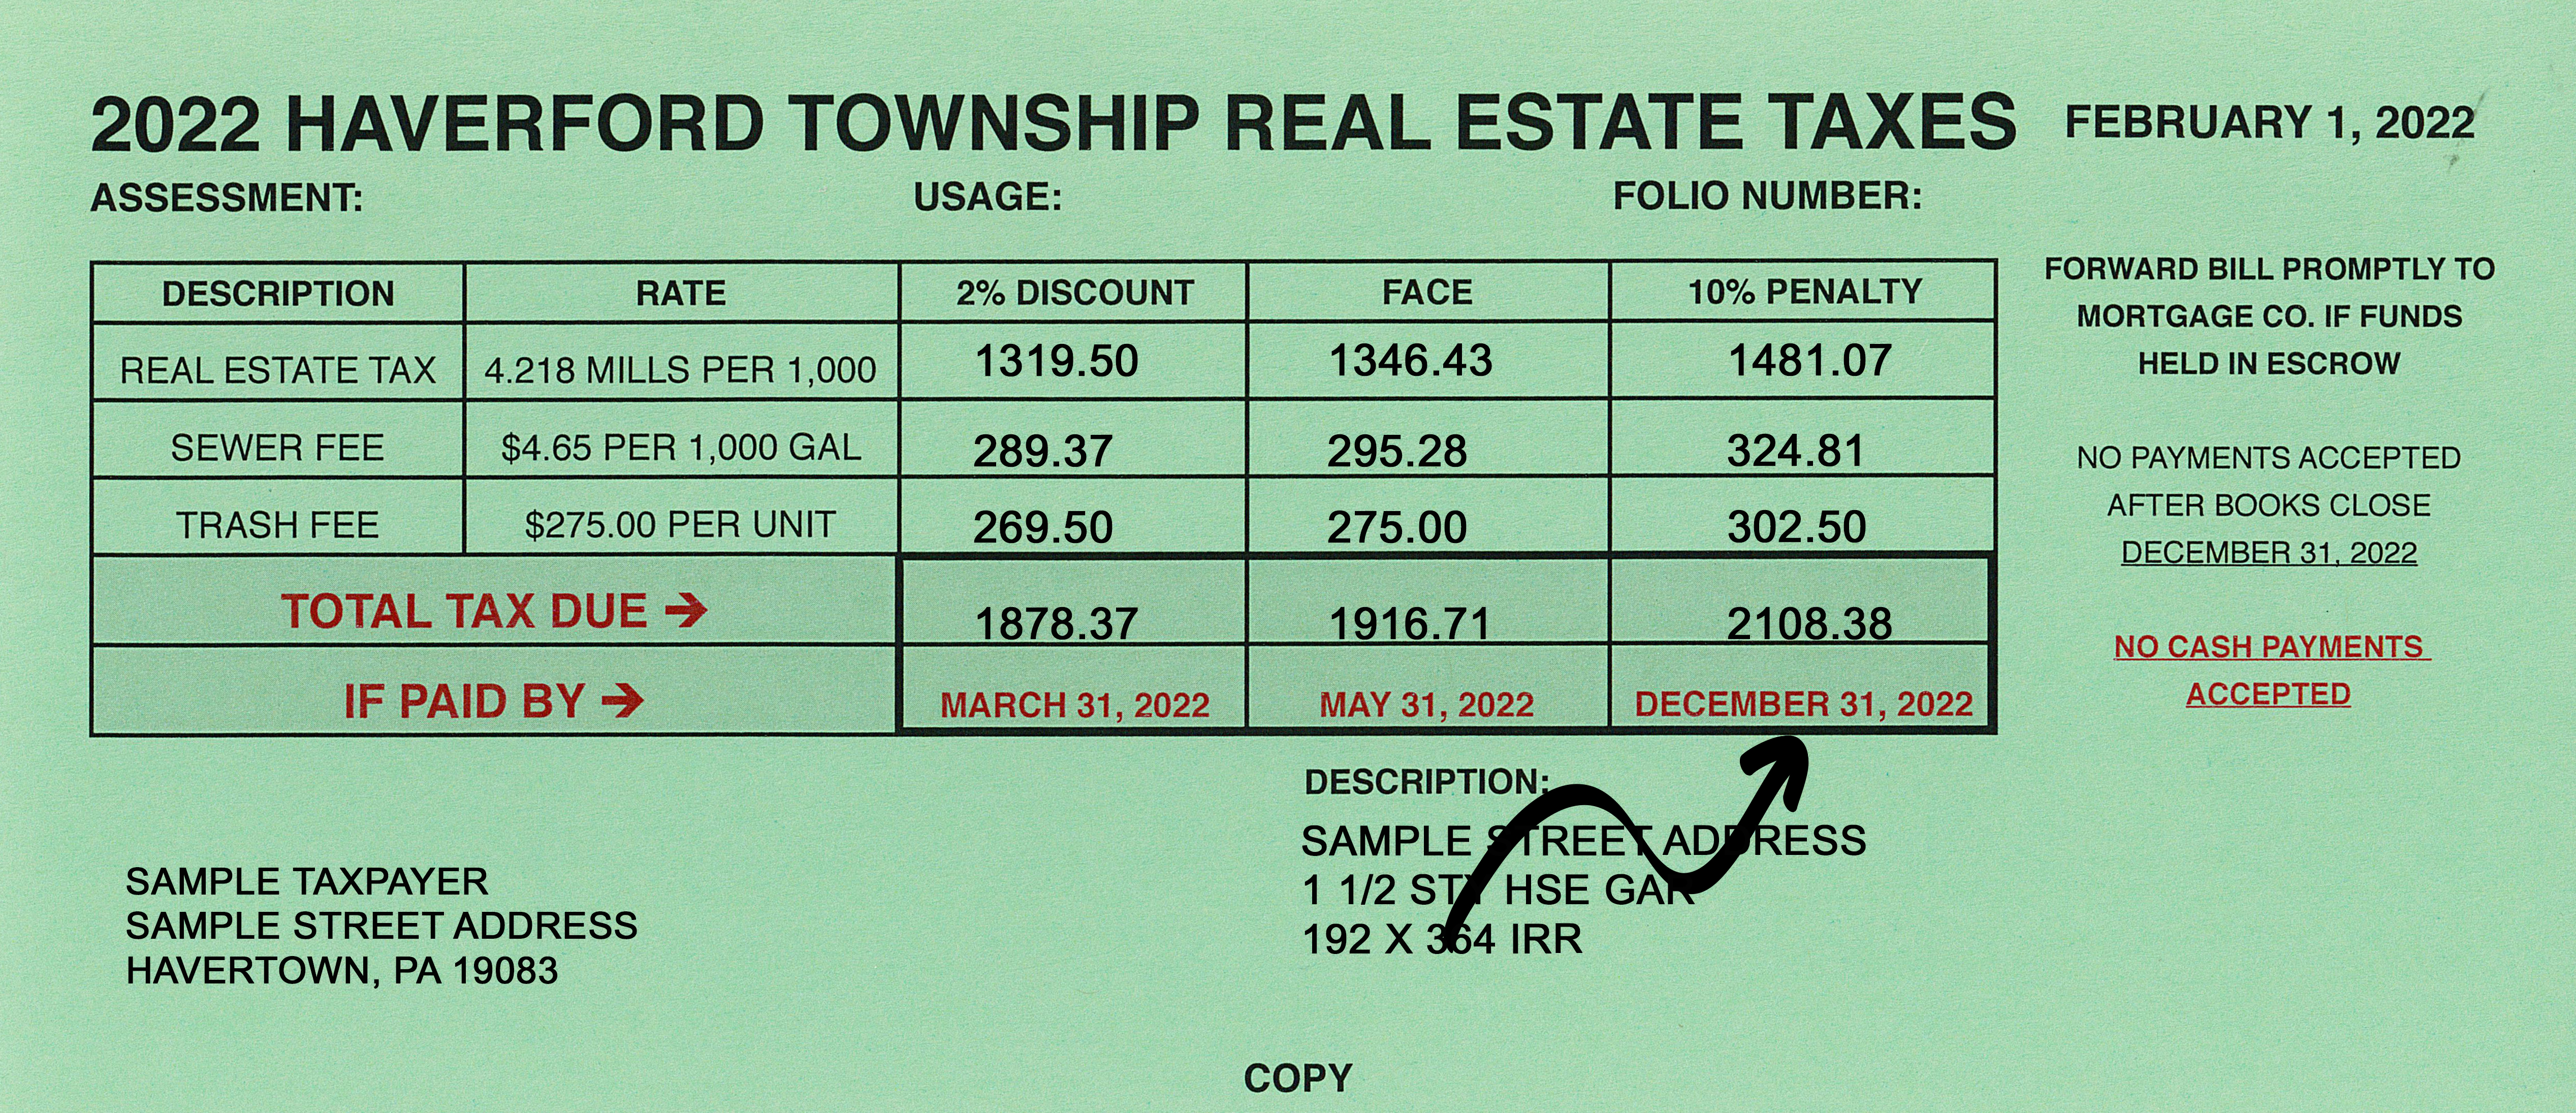 Image of 2022 Haverford Township Real Estate Taxes